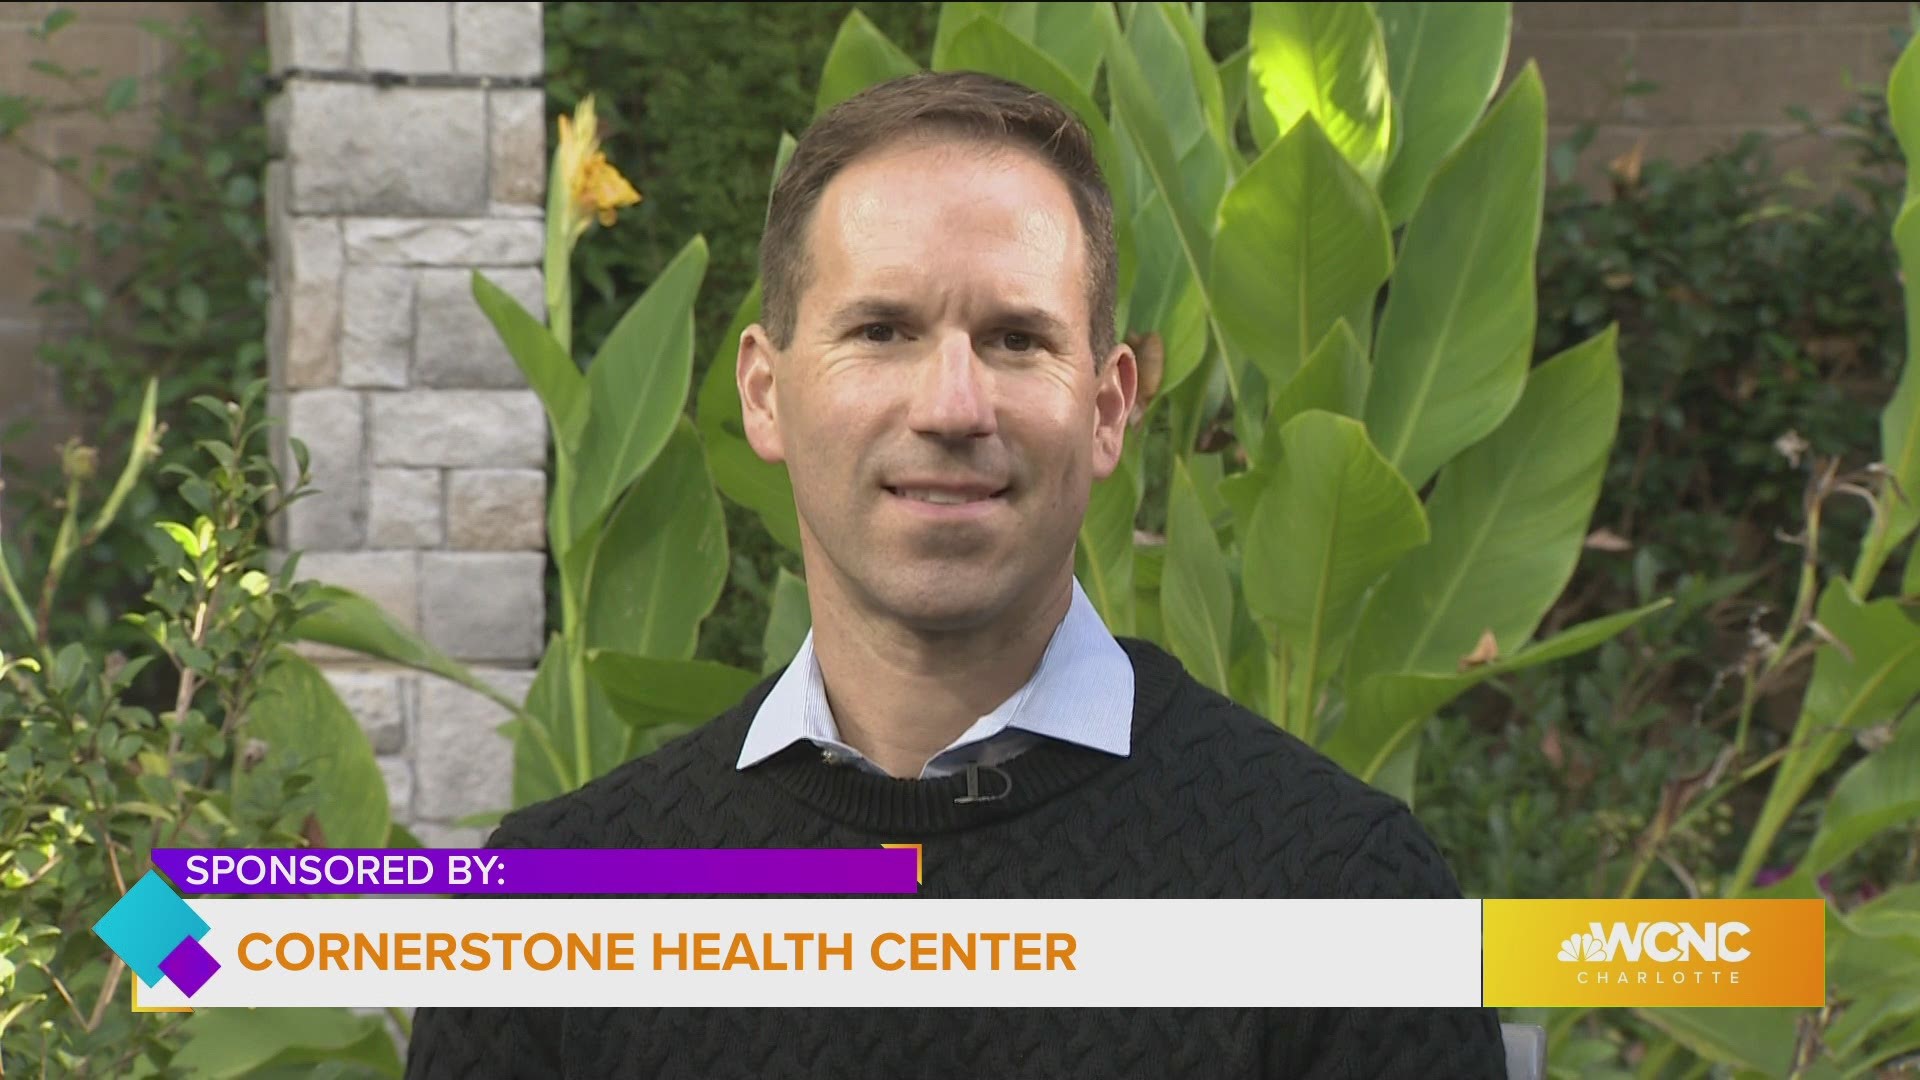 Cornerstone Health Center tells us more about how the thyroid works